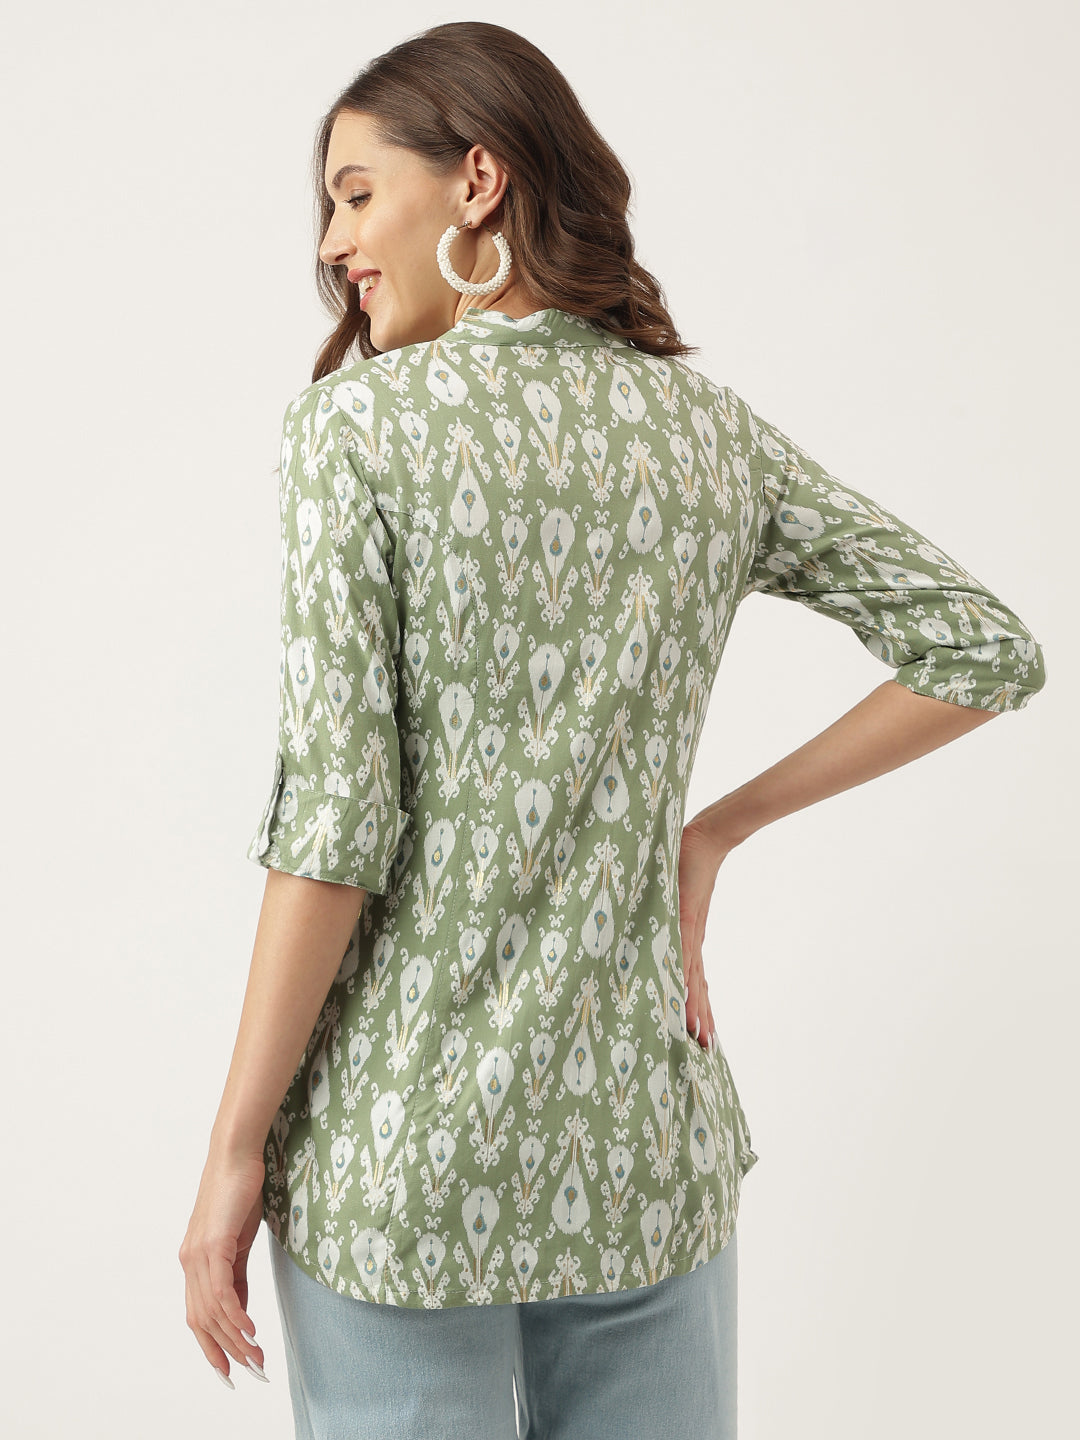 Divena Green & White Floral Foil Printed Rayon Shirt Style Top